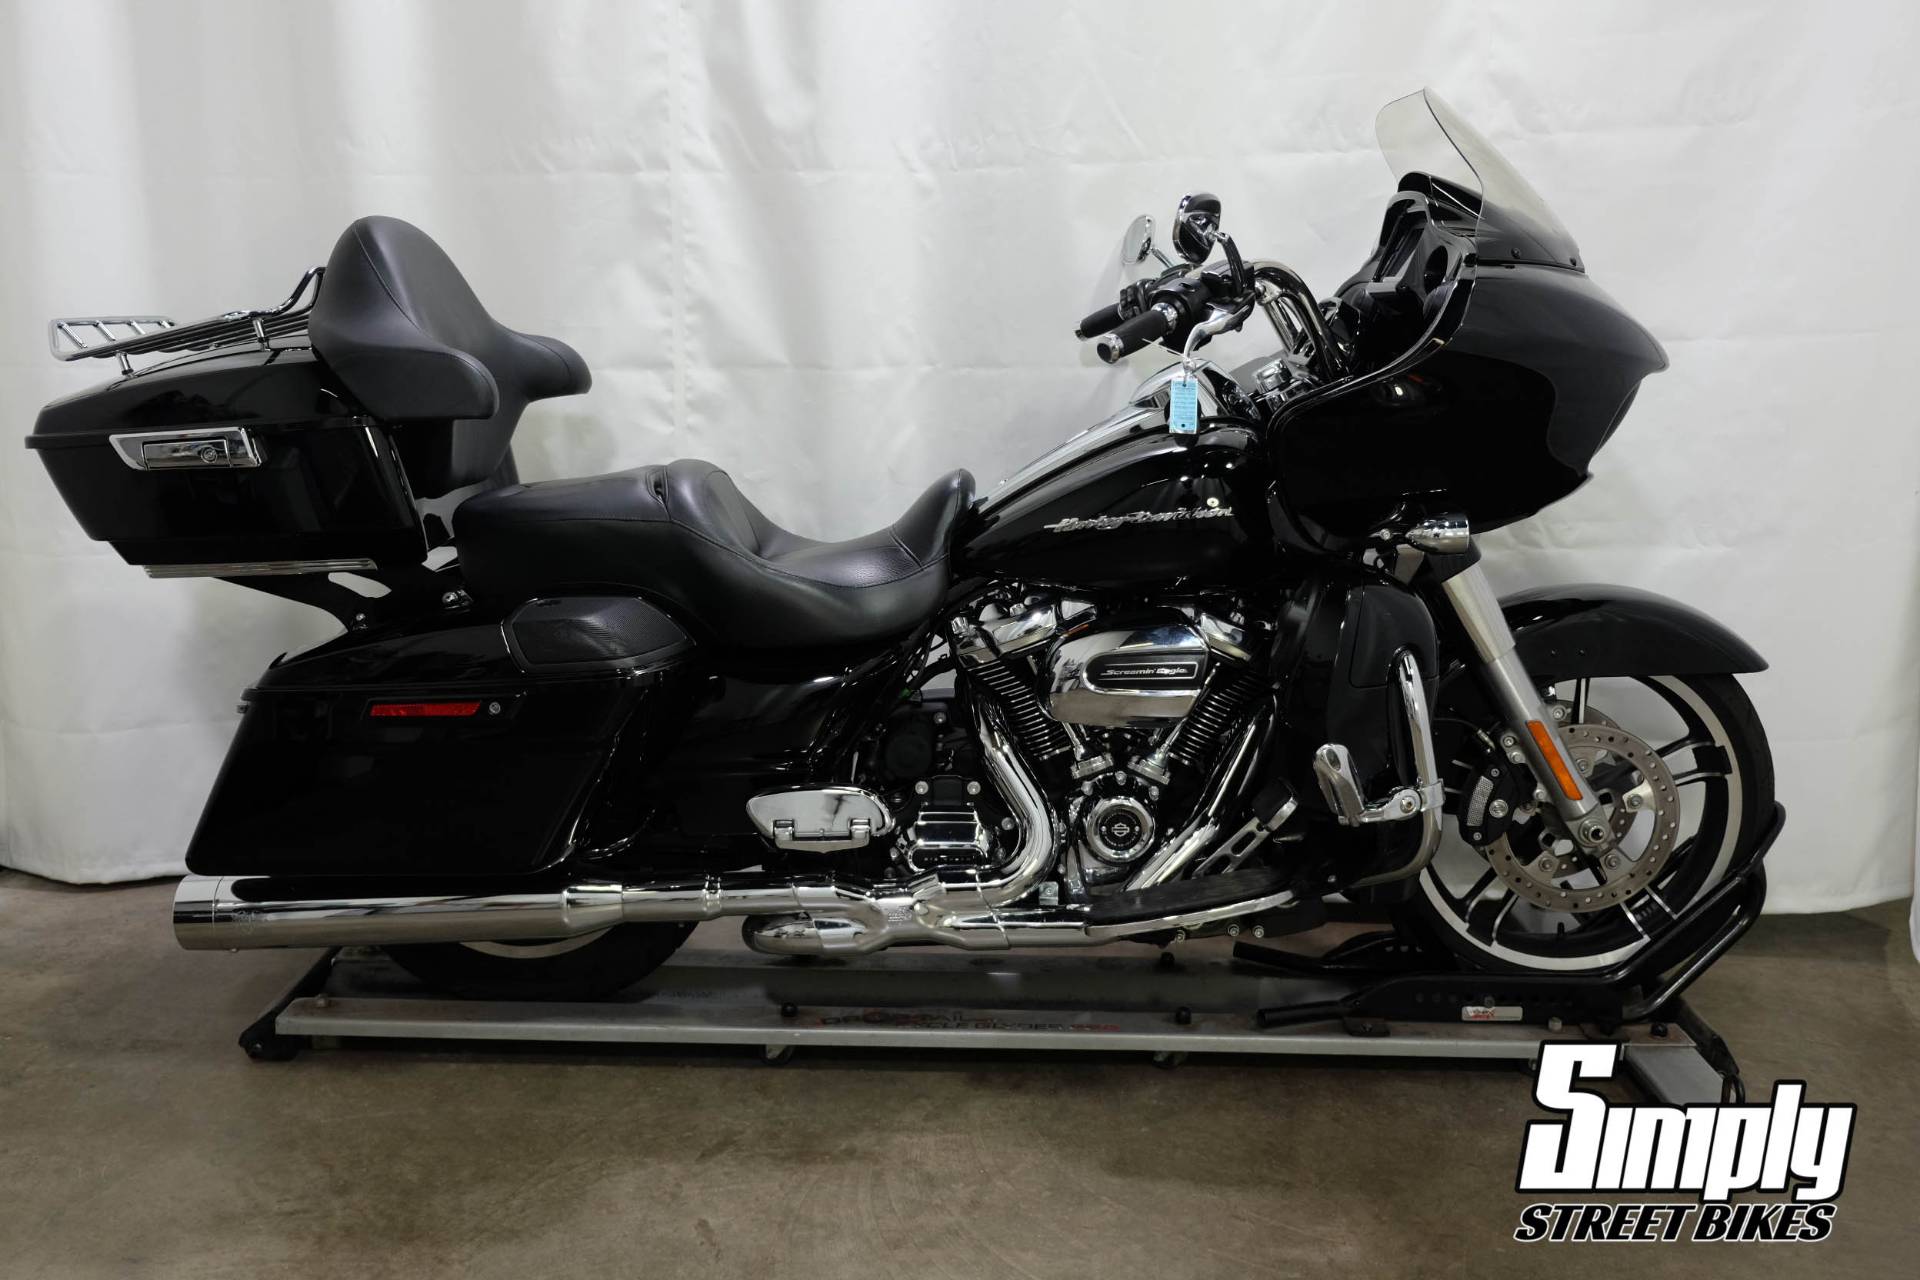 2017 road glide special for sale